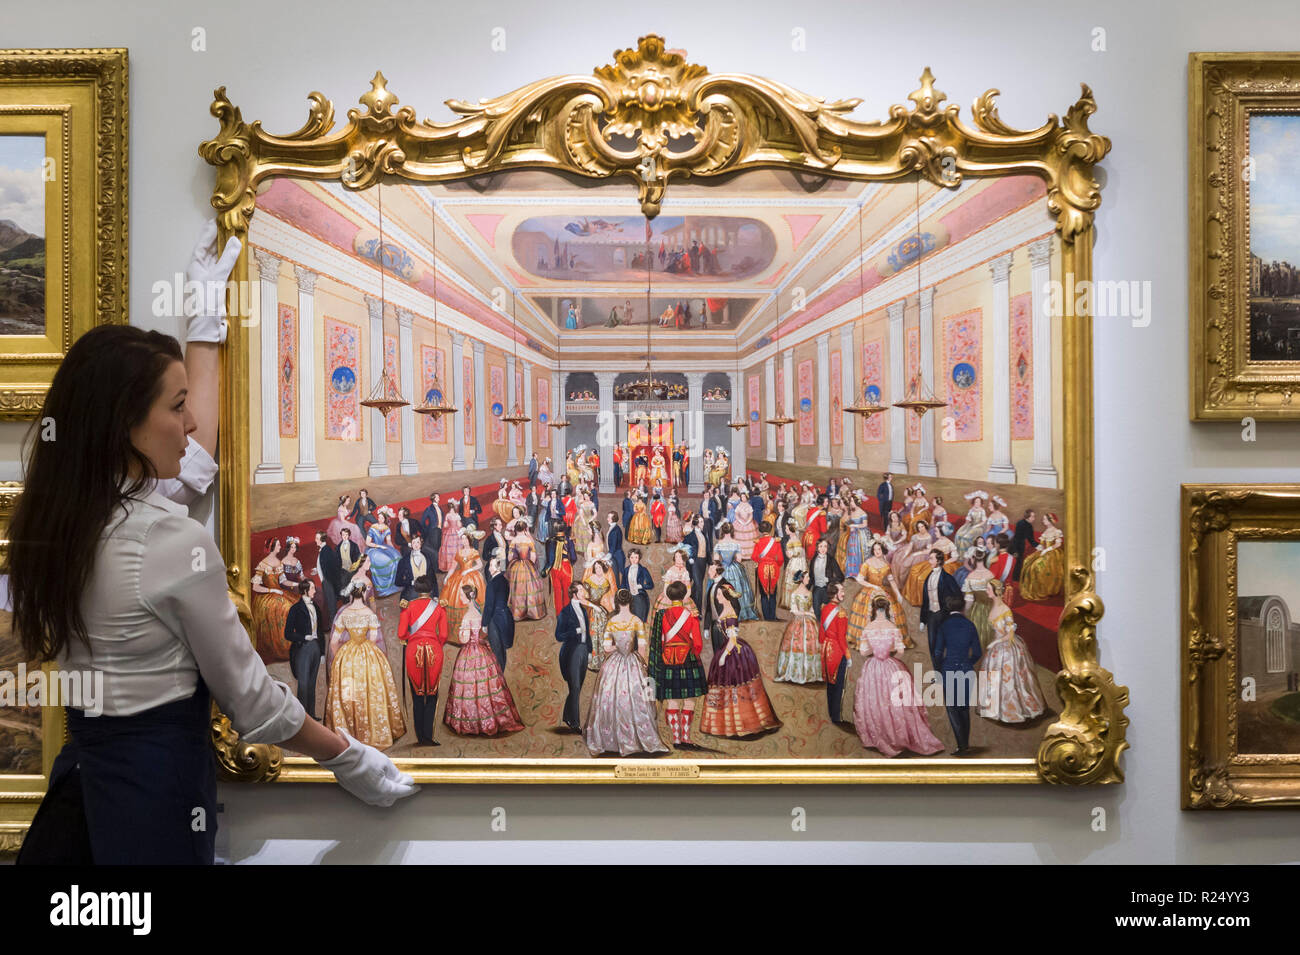 London, UK.  16 November 2018. A technician presents 'St. Patrick's Hall, Dublin Castle', by F.J. Davis (Est. GBP200,000-300,000).  Preview of 'A Living Legacy', the Irish Art Collection of Brian P. Burns, a collection spanning artists from the 18th century to the present day.  Over 100 works will be offered for sale on 21 November at Sotheby's in London.  Credit: Stephen Chung / Alamy Live News Stock Photo